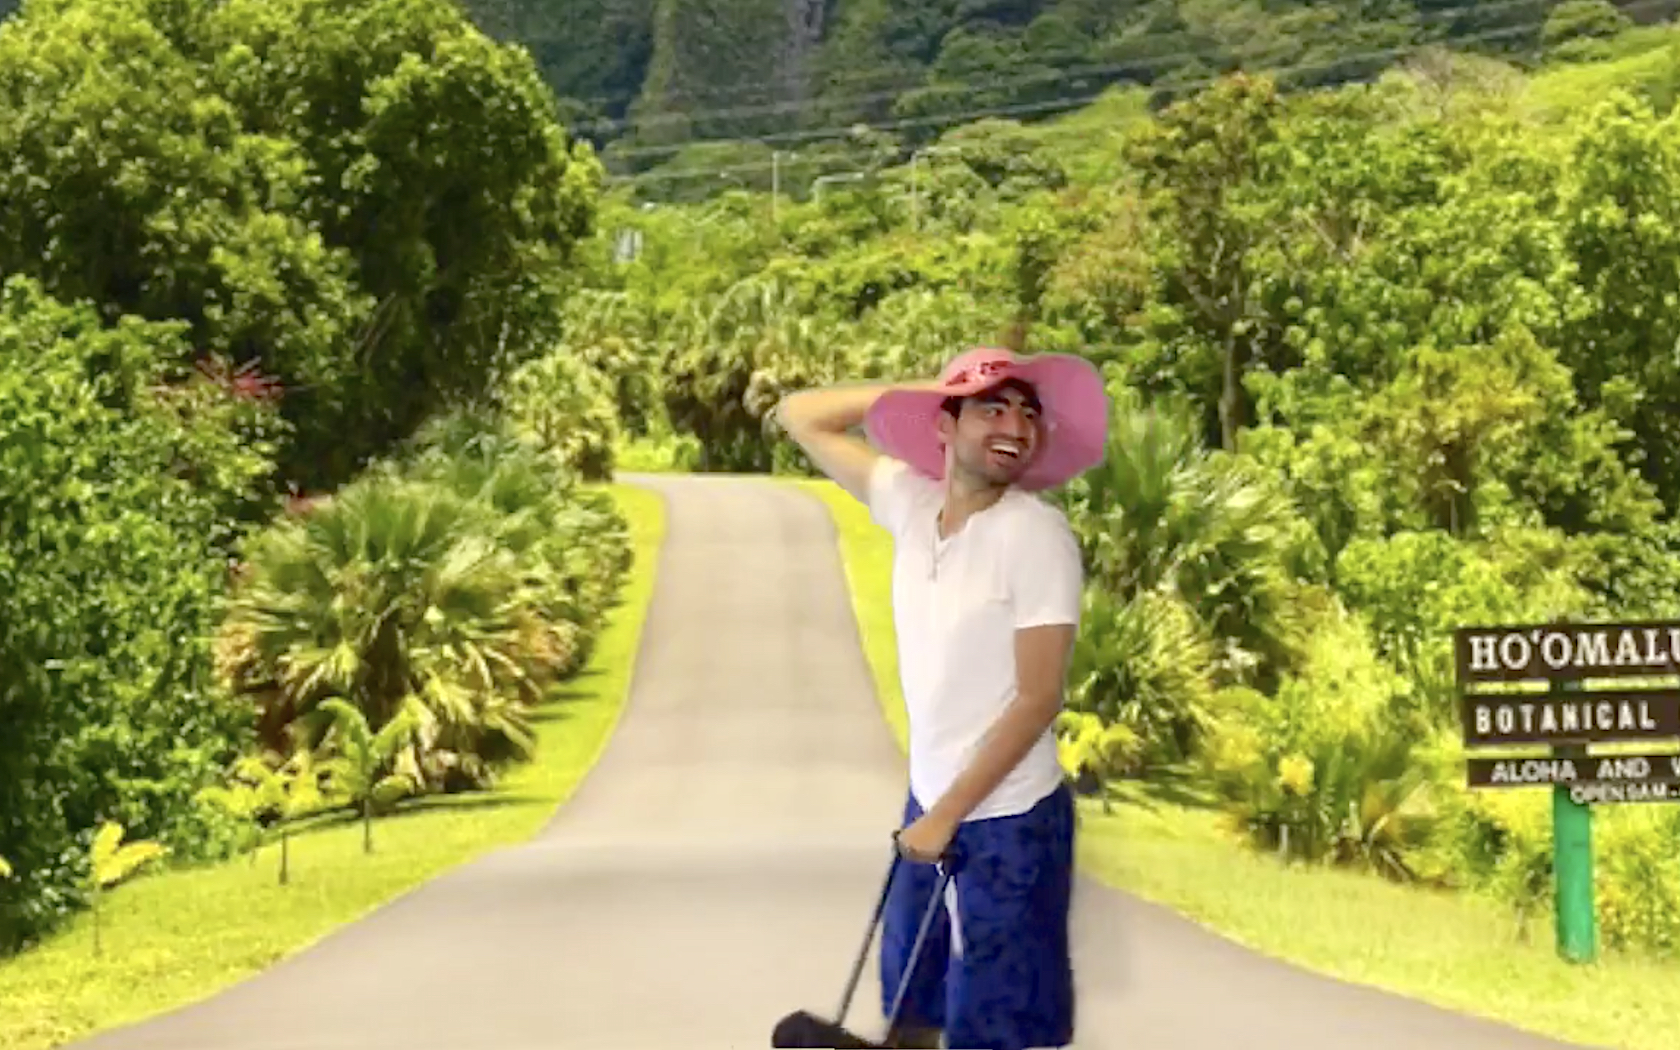 This Guy Couldn't Afford To Visit Hawaii So He Made A Fake Holiday Video